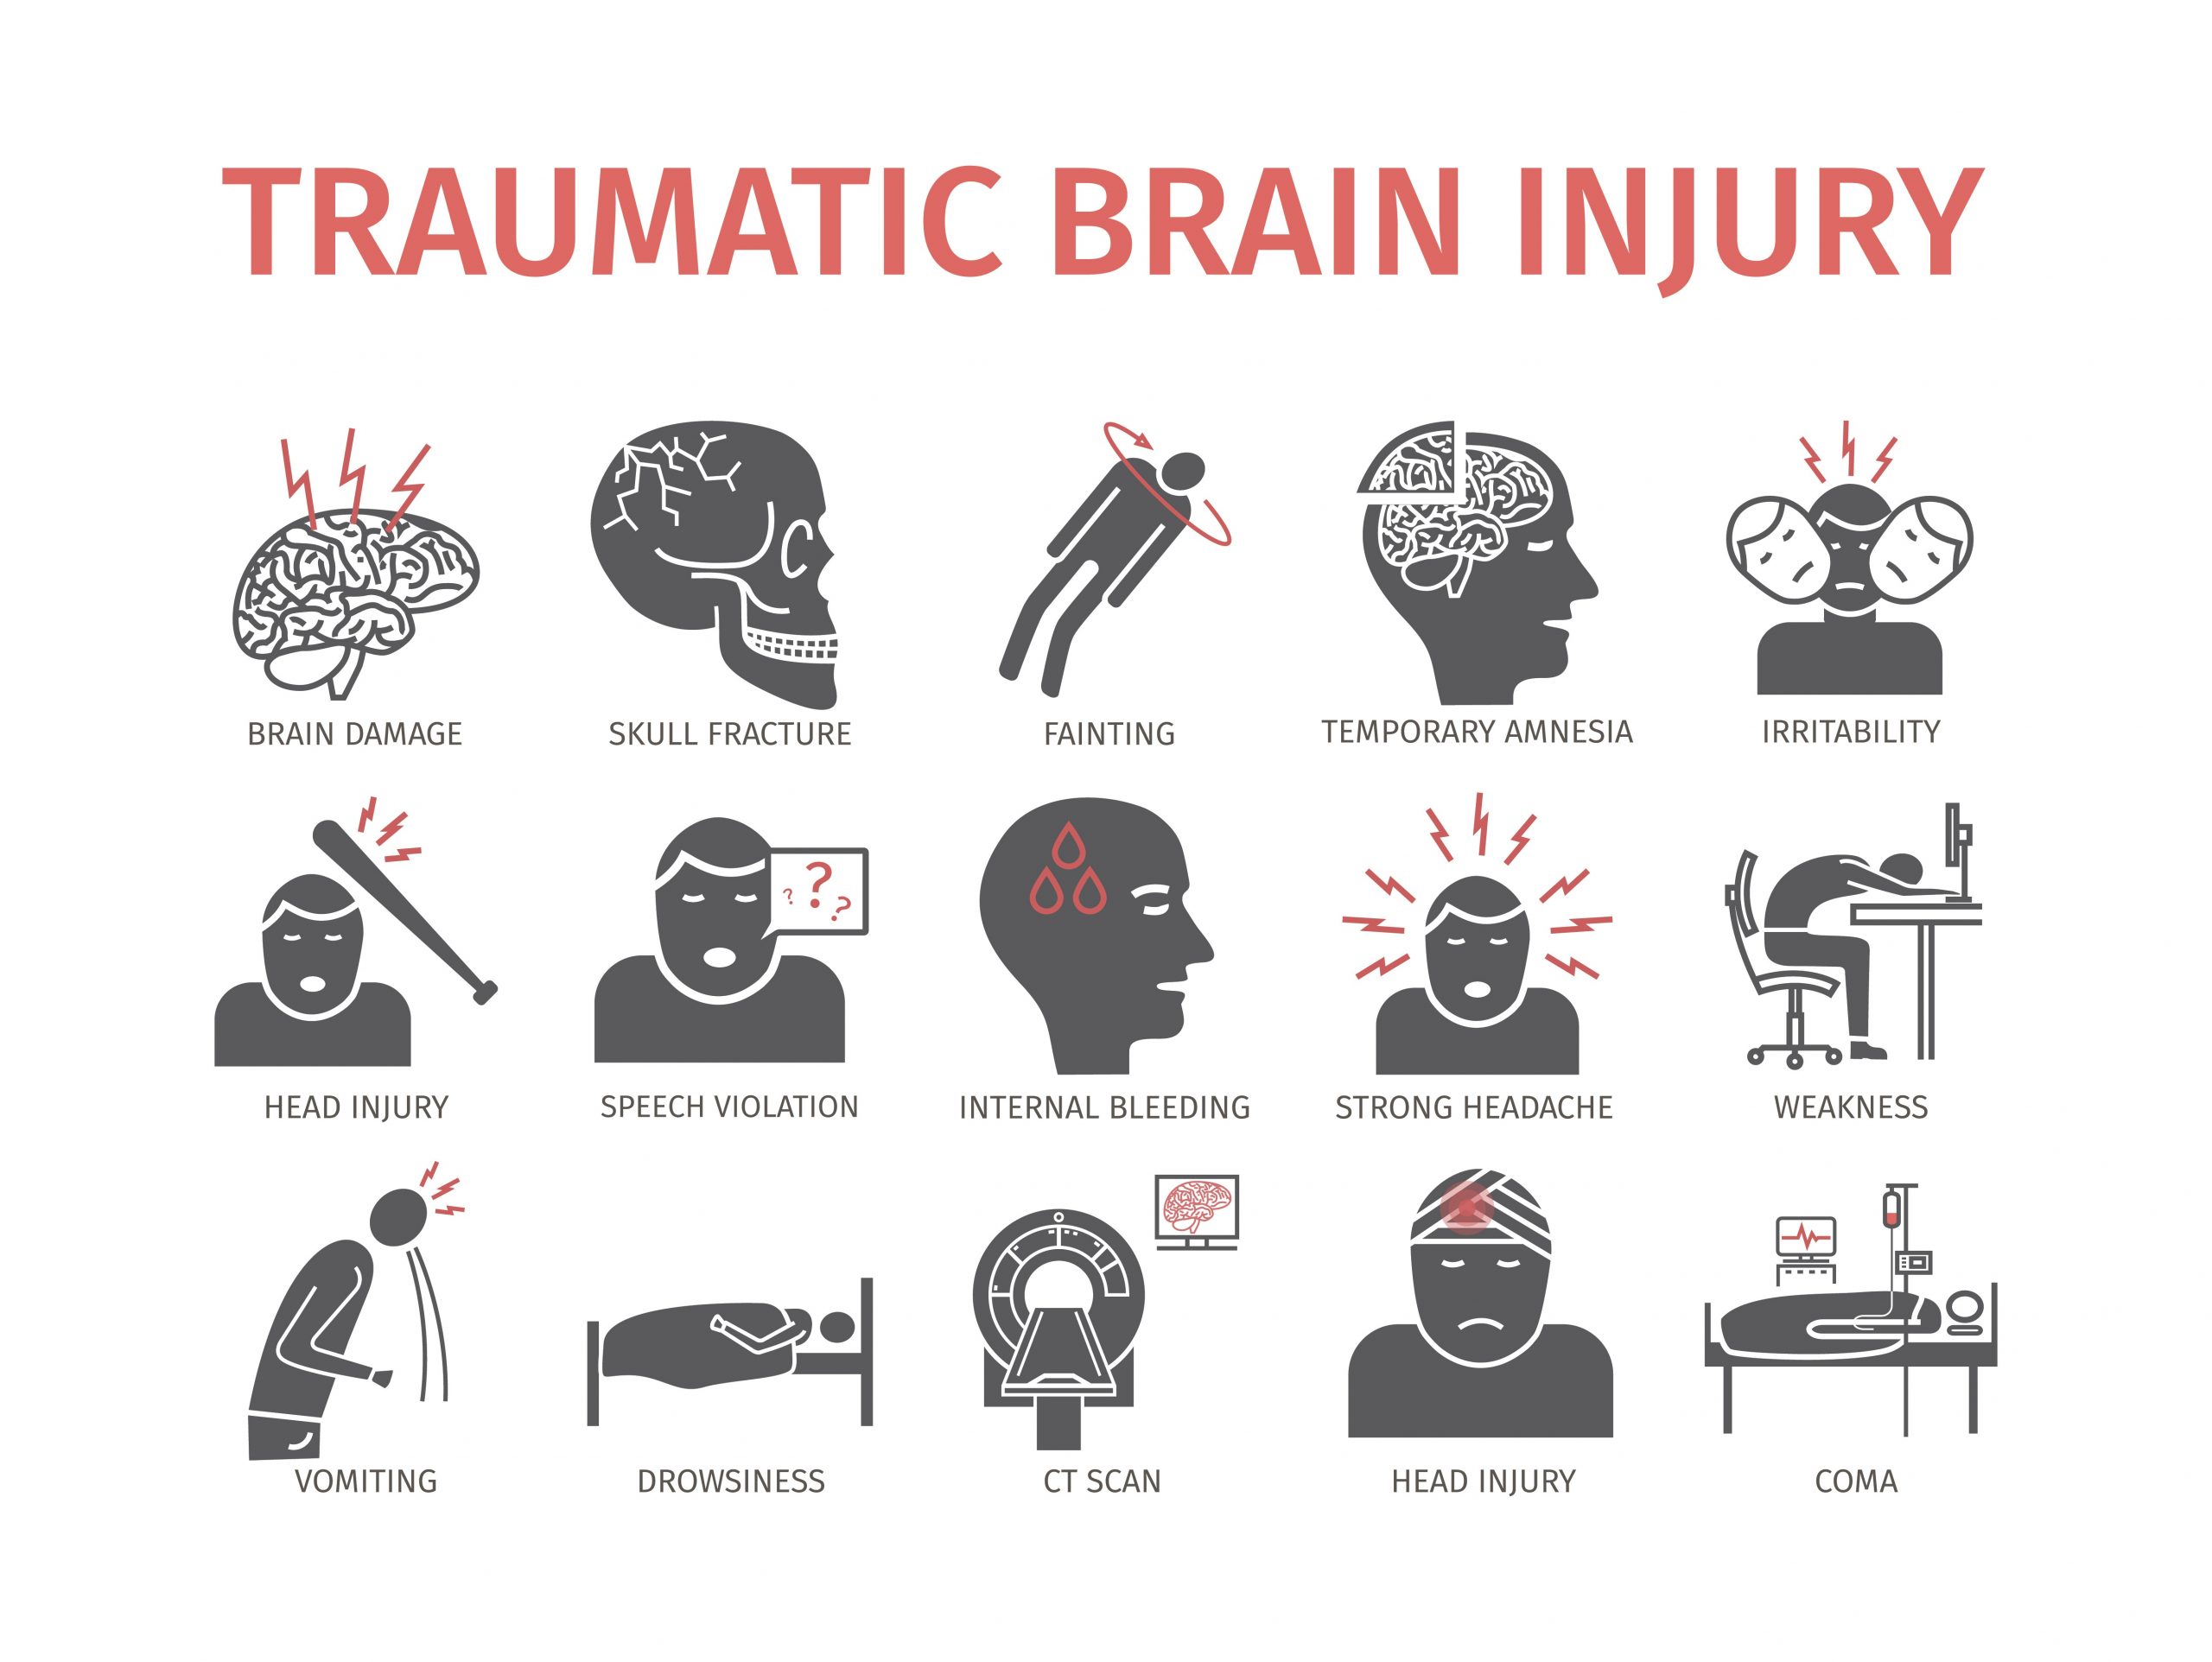 What are the classifications of traumatic brain injury?